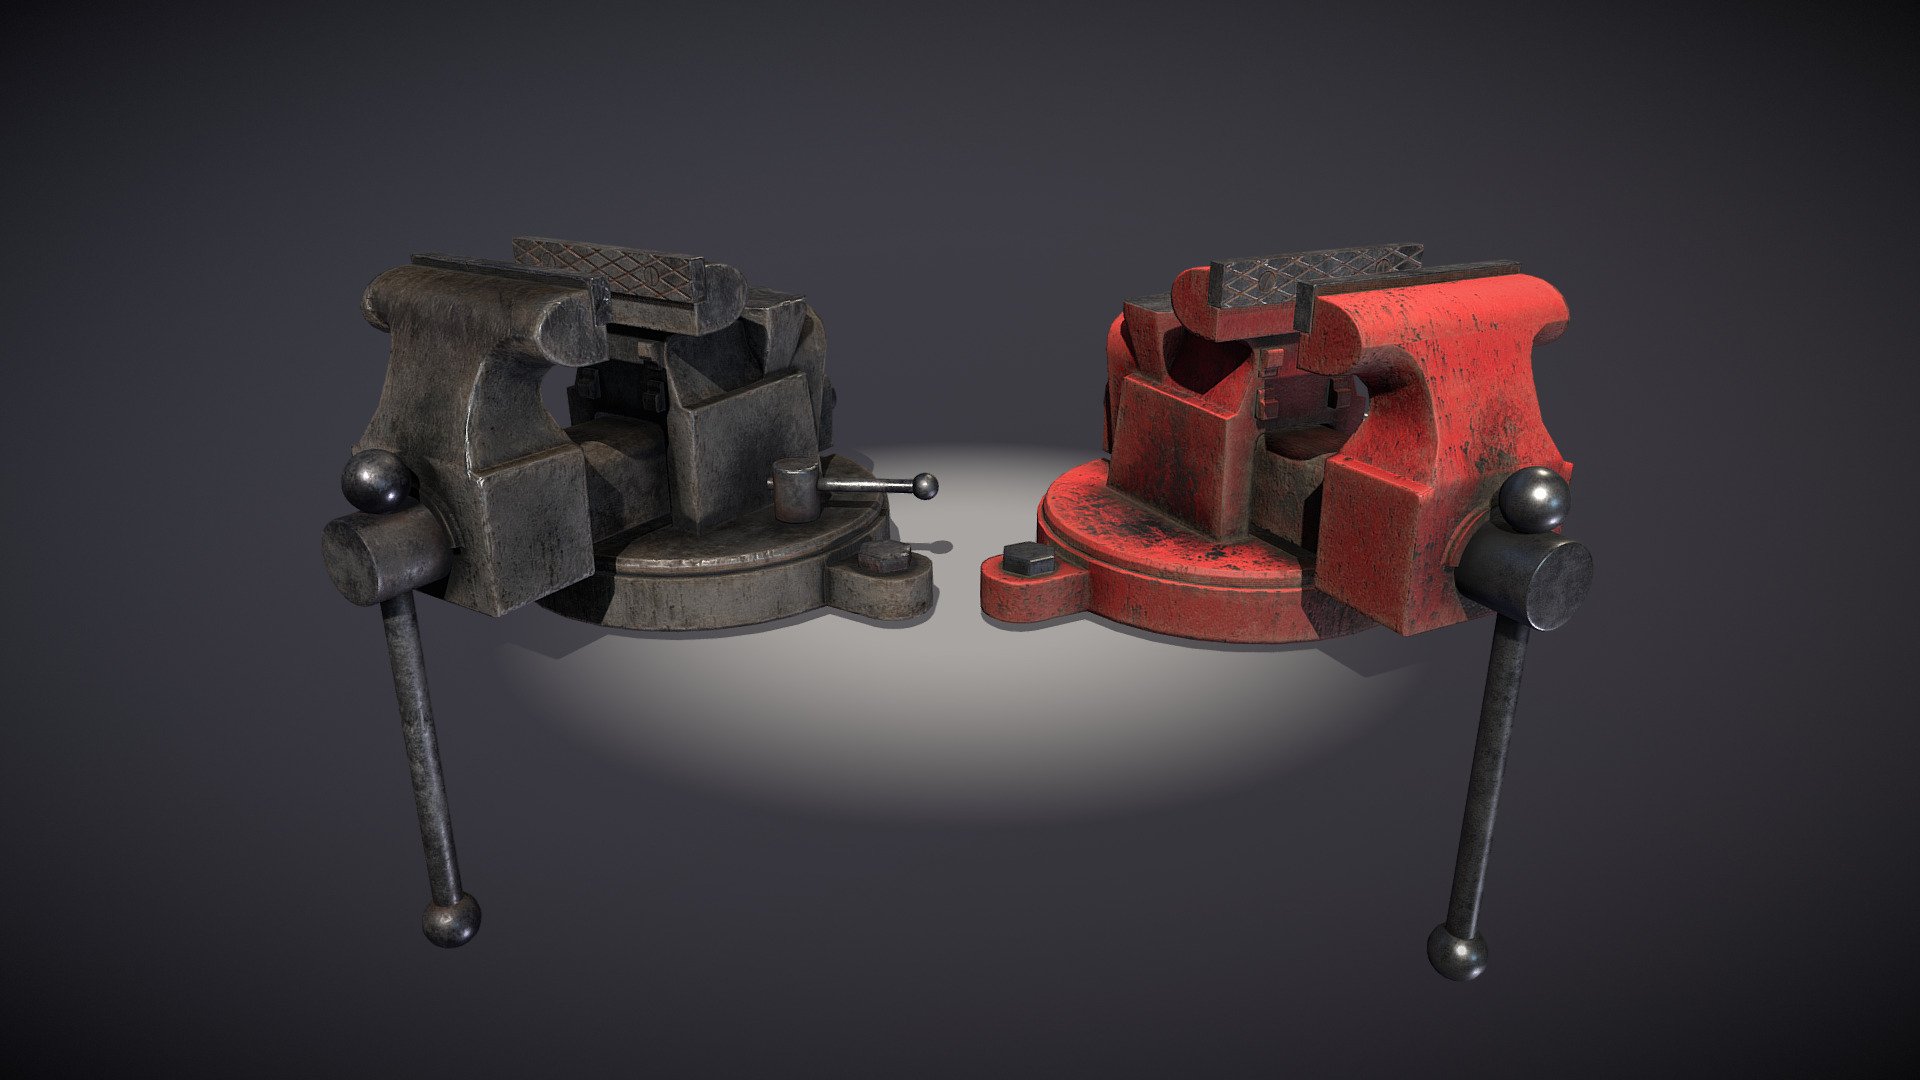 Vice - Includes Clean/Used and Dirty/Dilapidated variant texture set.



2k PBR Textures • Albedo • Metalness • Roughness • Normal • AO



Additional file contains .fbx of the asset centered and all textures 3d model